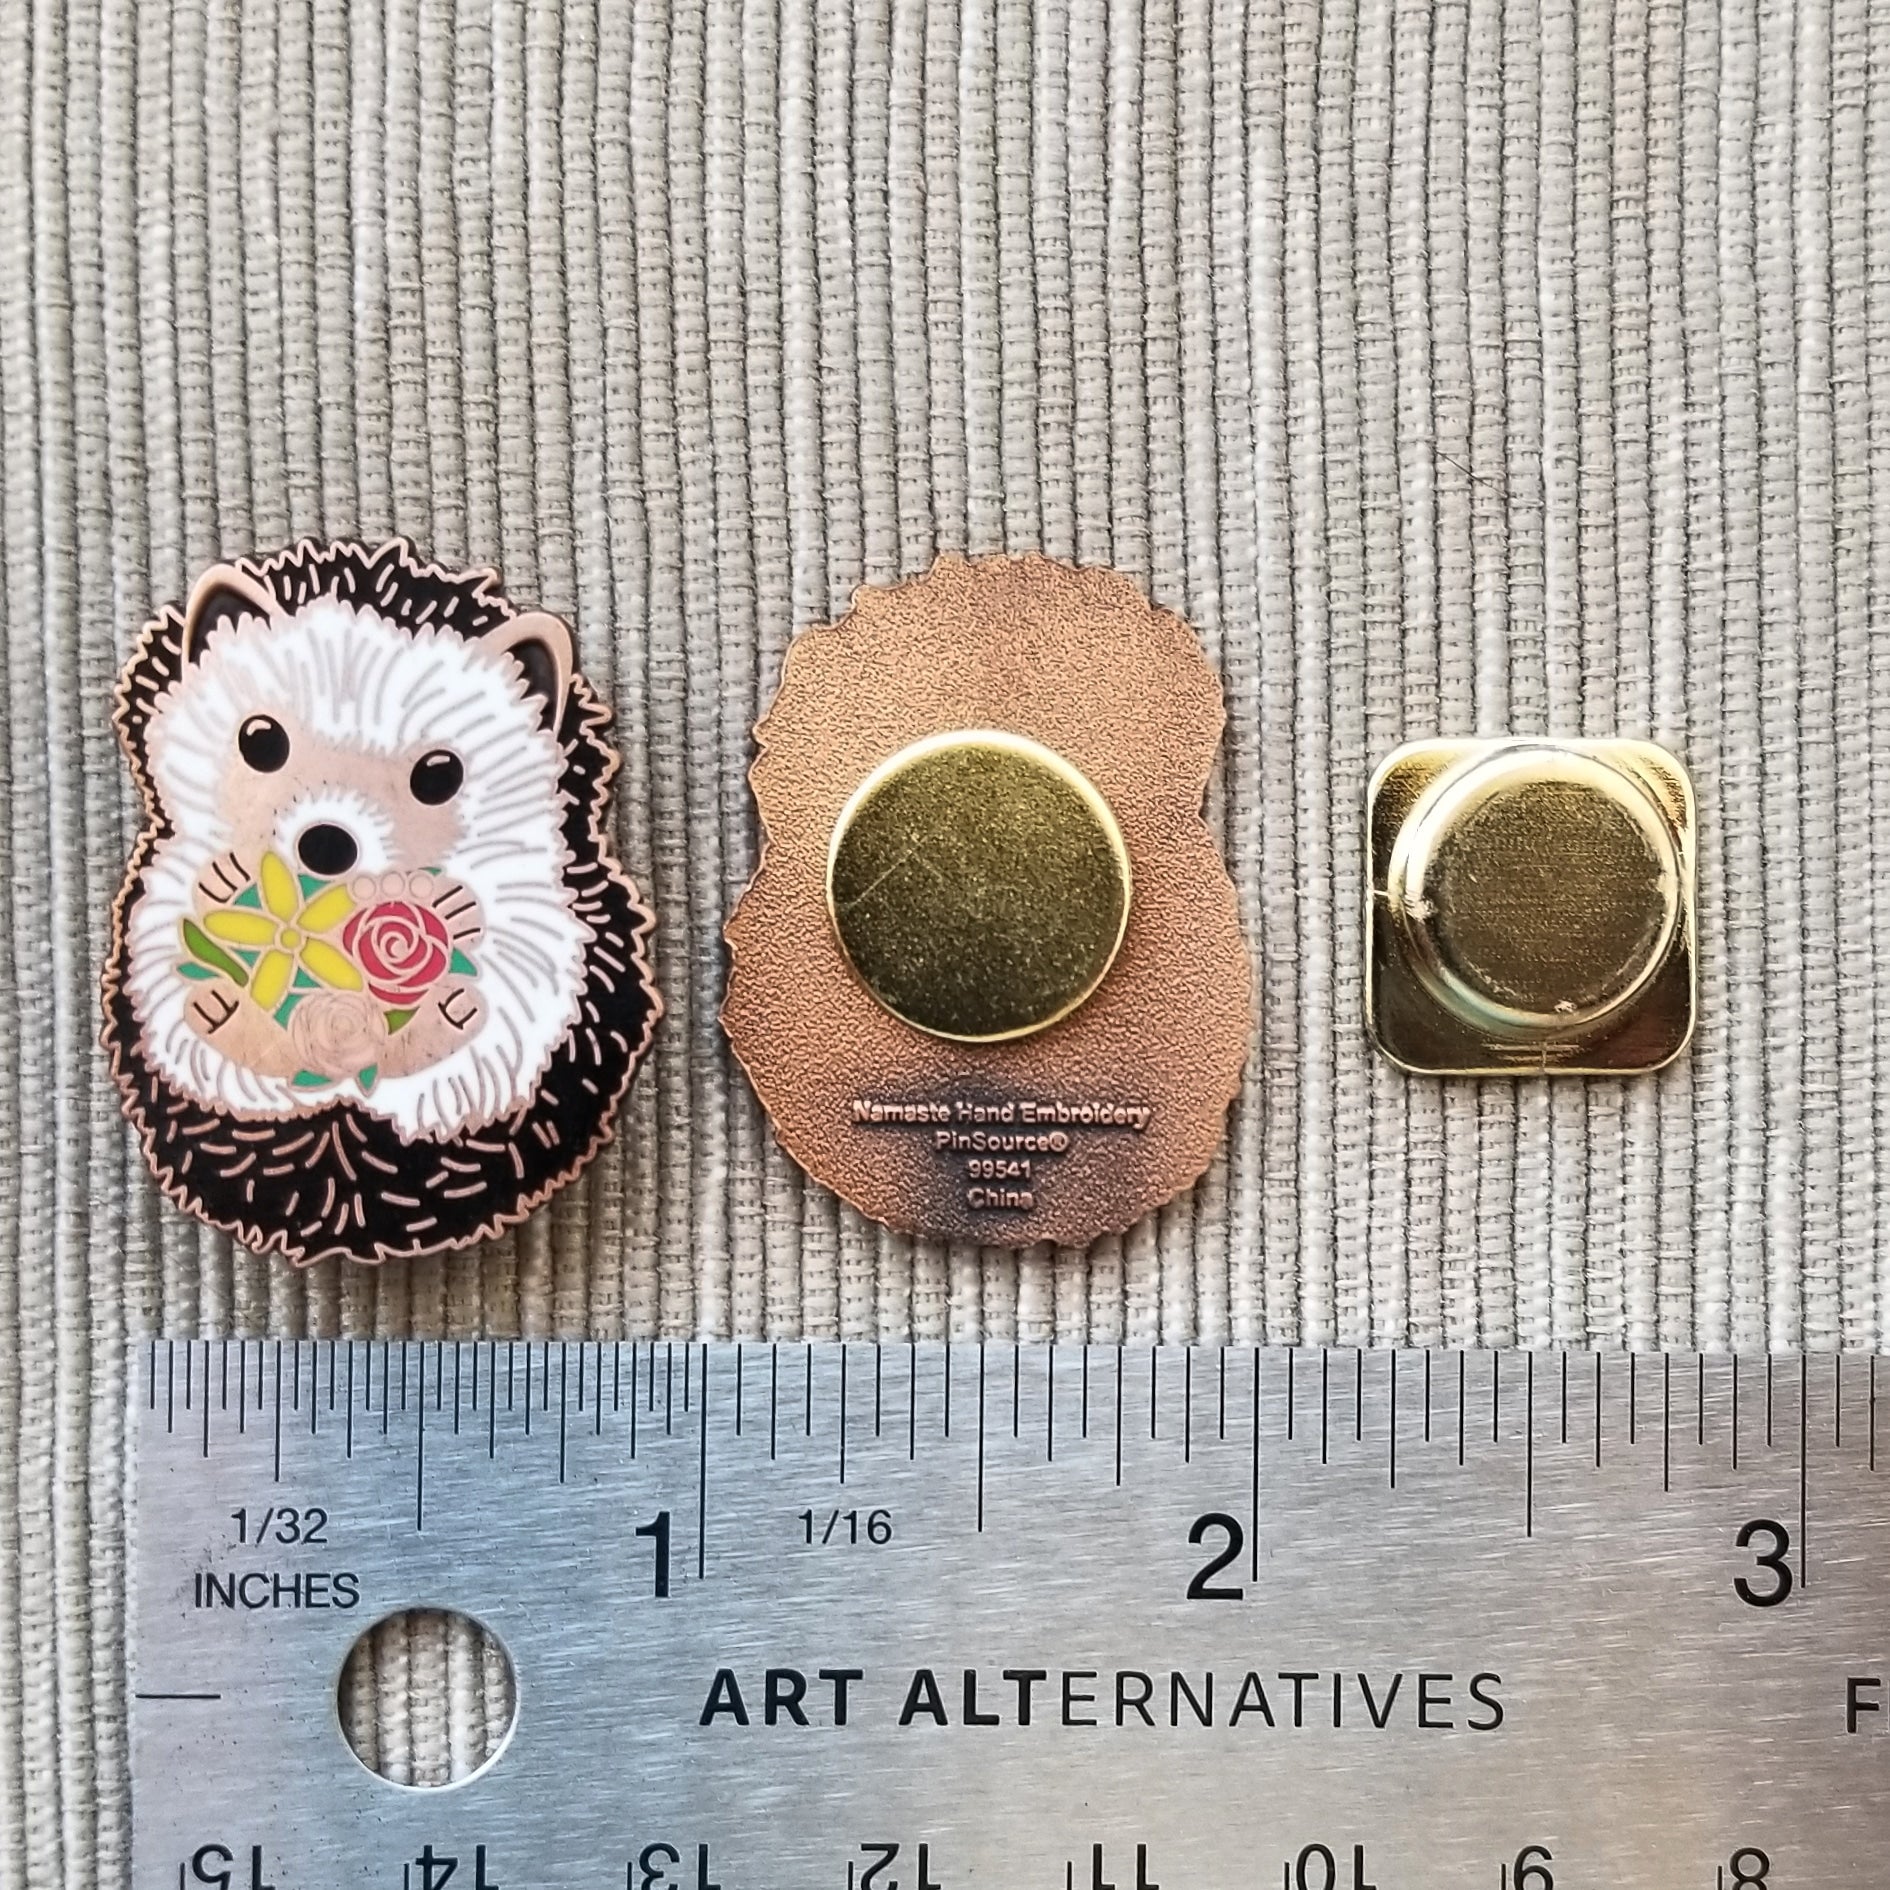 Outdoor Enamel Needle Minders, Needle Threader for Embroidery